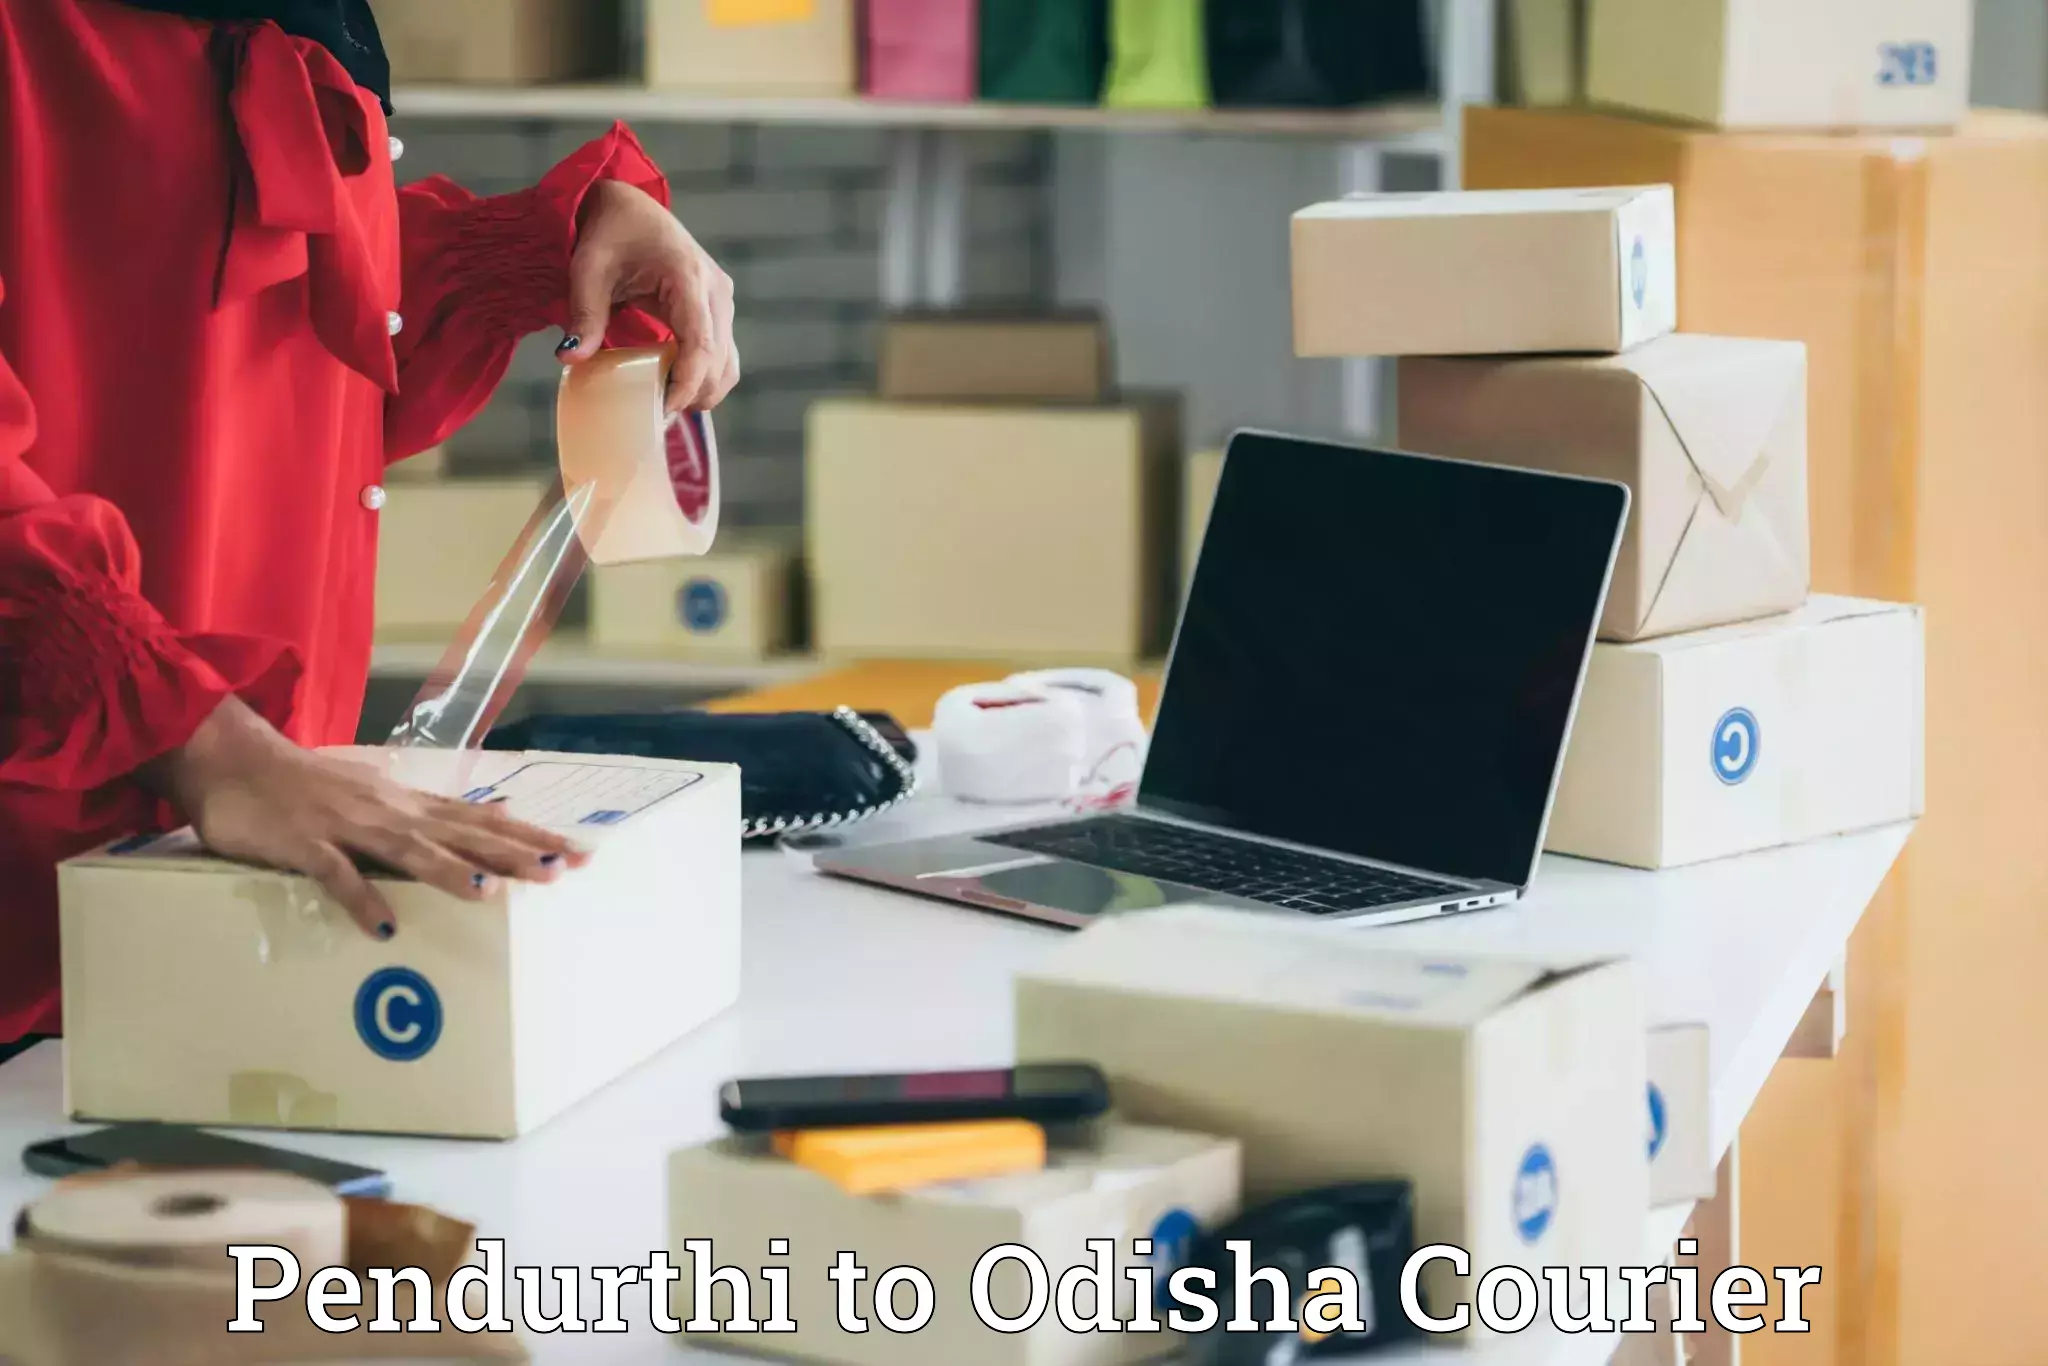 Global courier networks Pendurthi to Daspalla